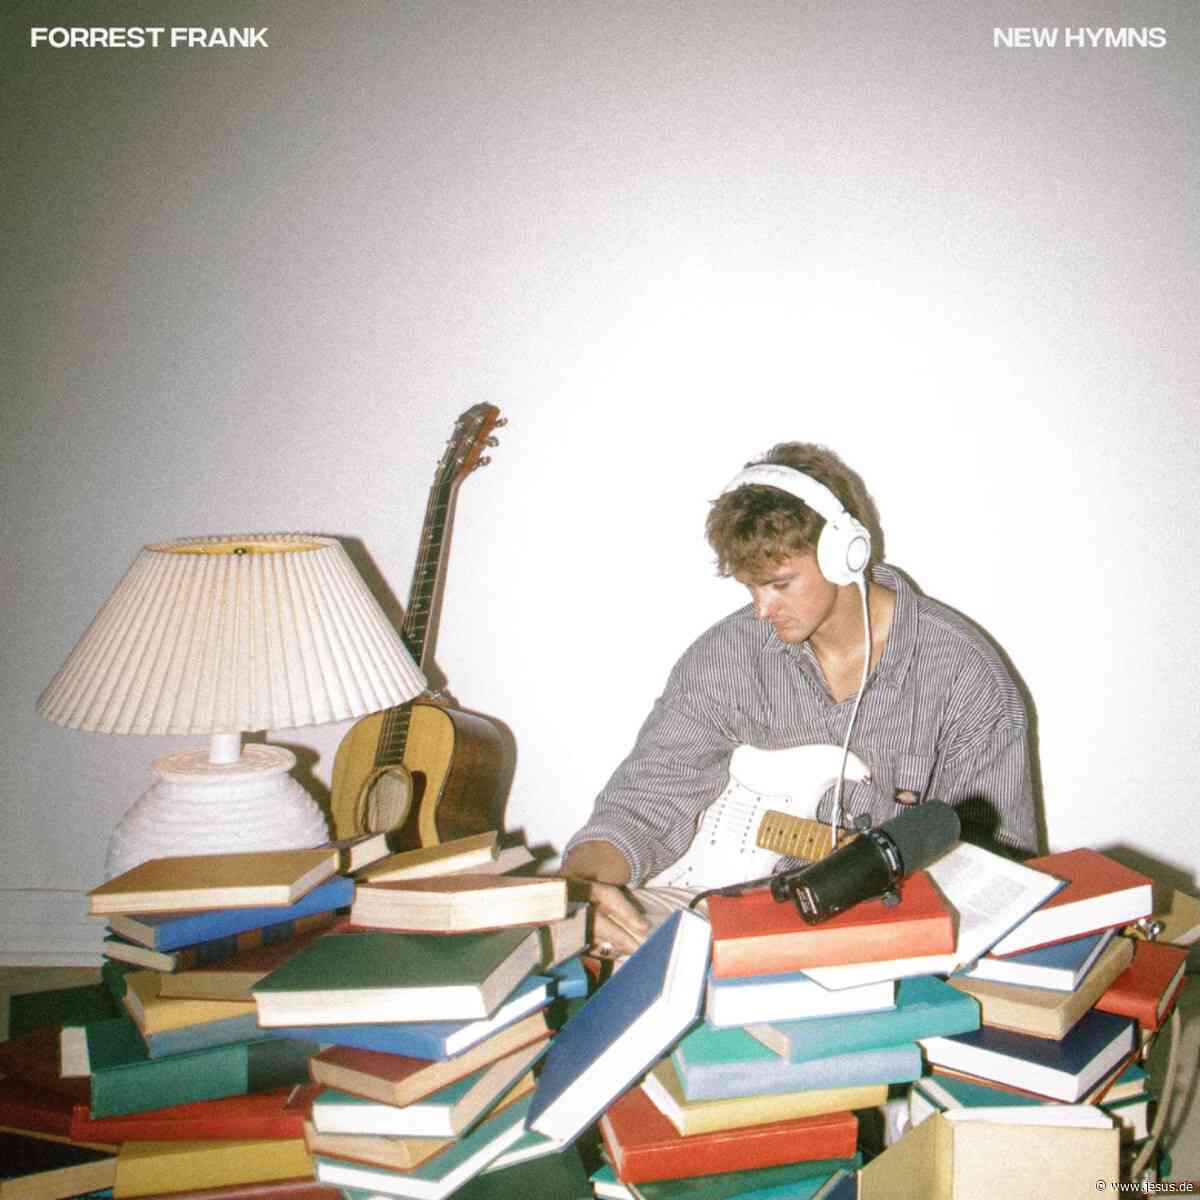 Forrest Frank: New Hymns